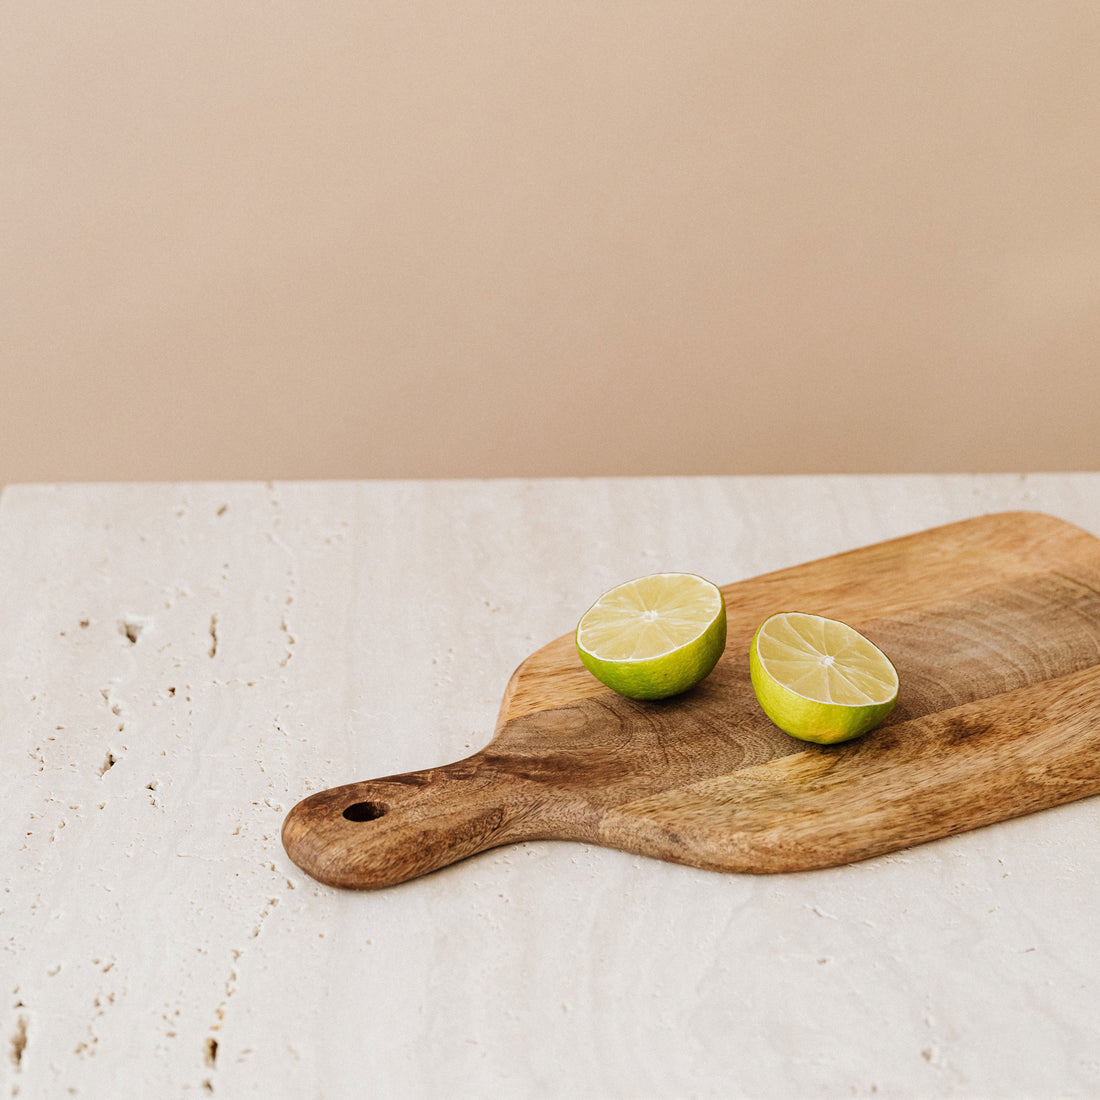 Cleaning a cutting board with lemon and salt